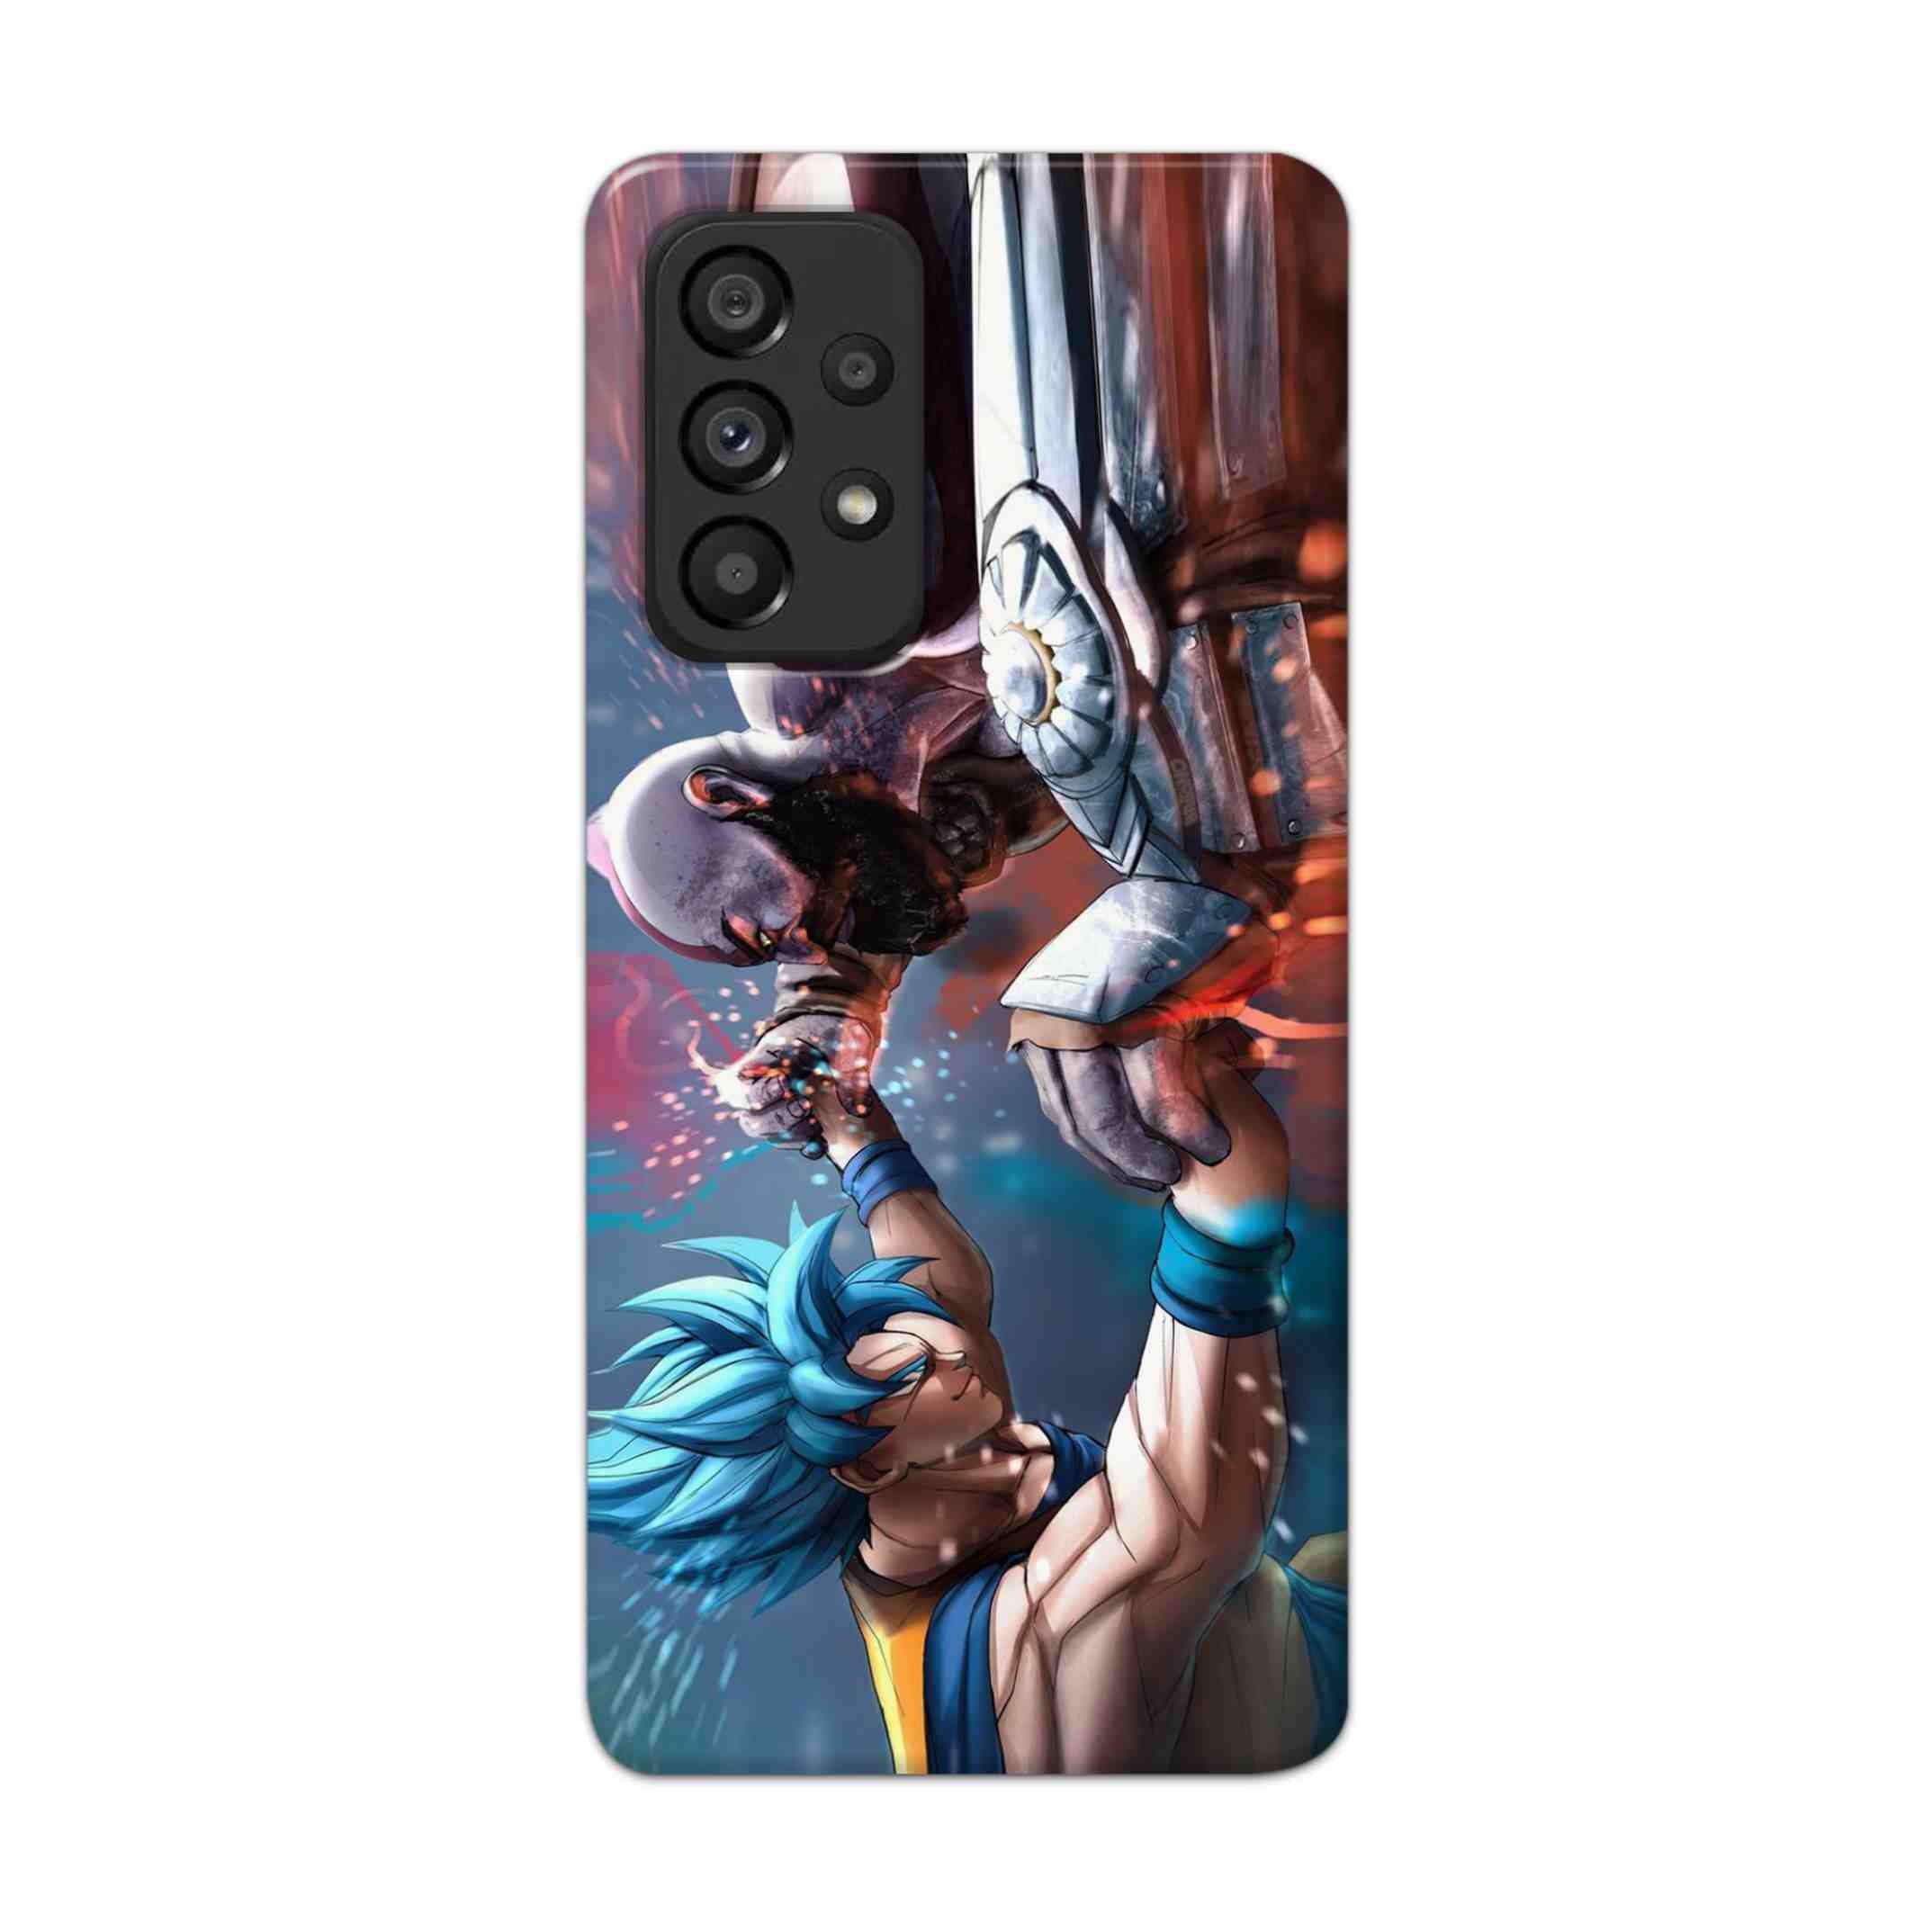 Buy Goku Vs Kratos Hard Back Mobile Phone Case Cover For Samsung Galaxy A53 5G Online